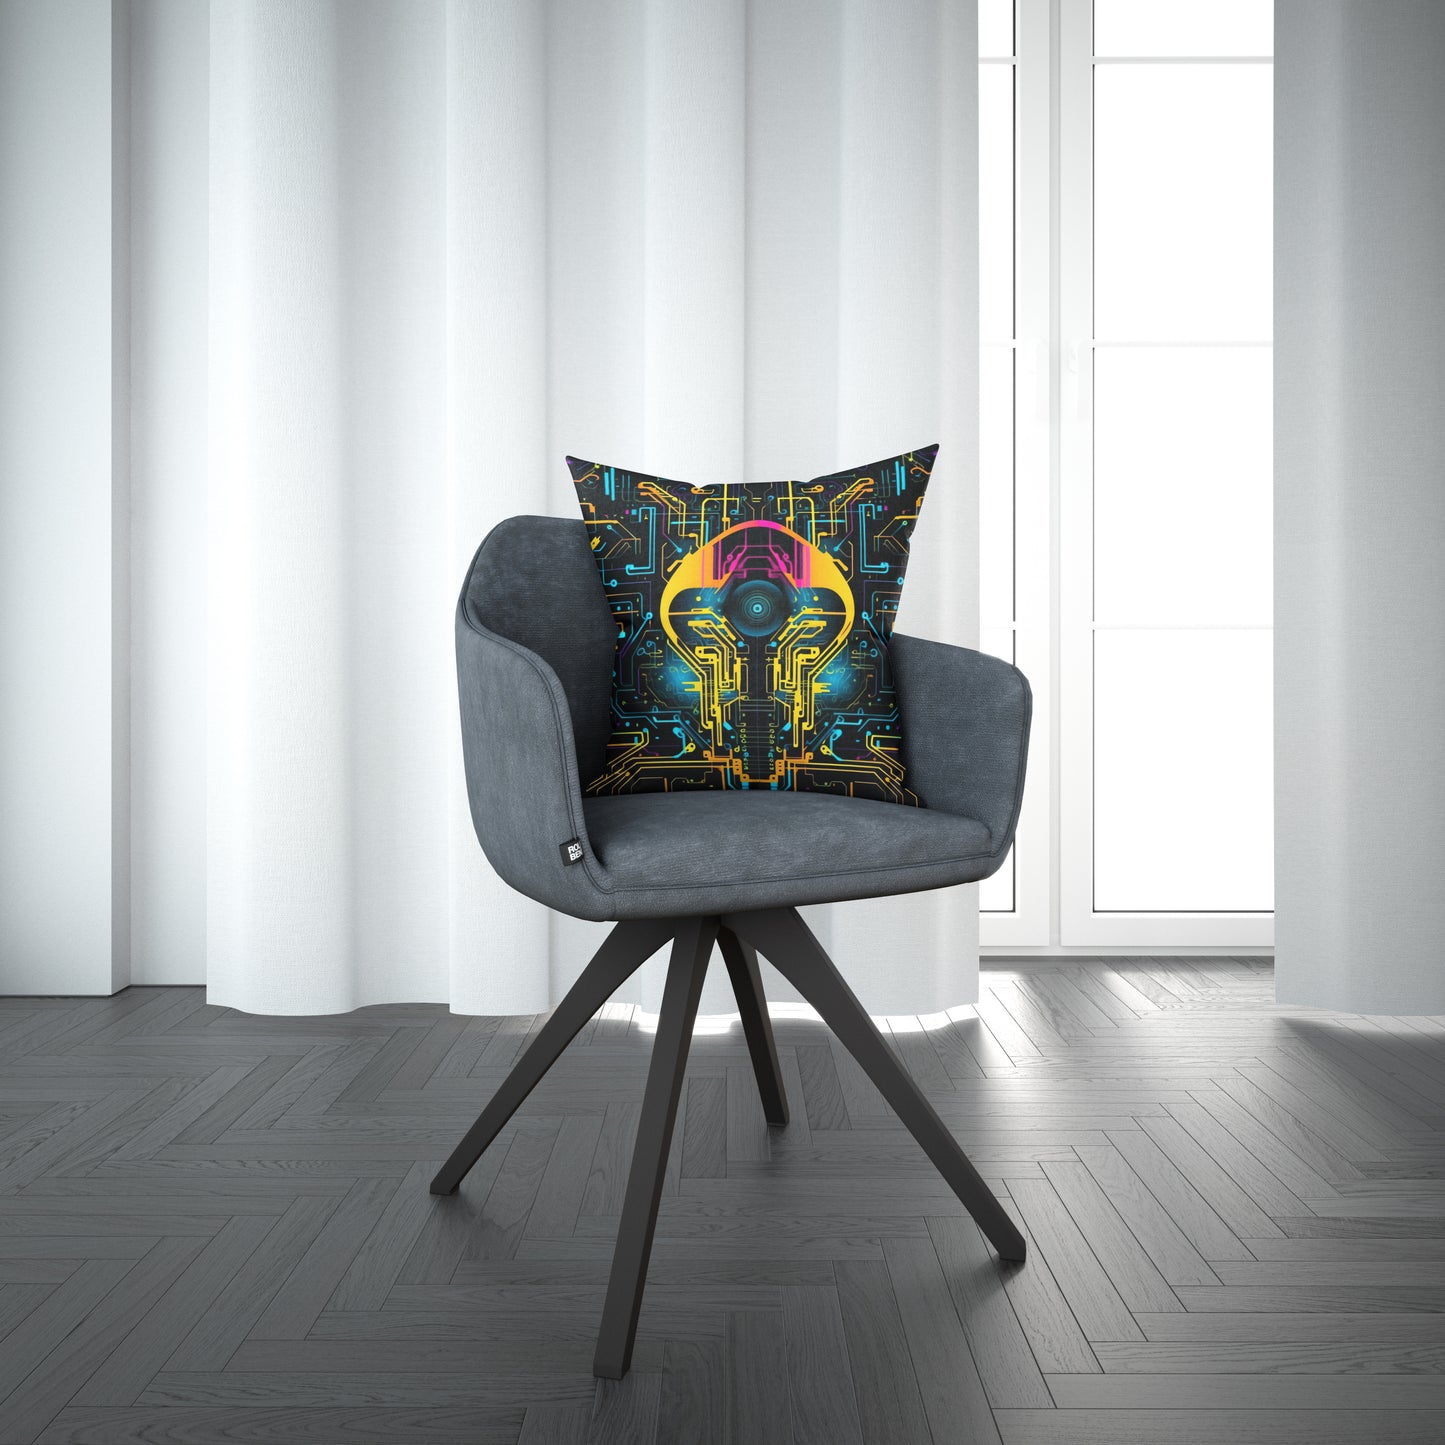 Cyberpunk Pillow, Yellow Robotic Circuit Board Throw Pillow, Tech Game Room Decor, Unique Square Cushion, Concealed Zipper